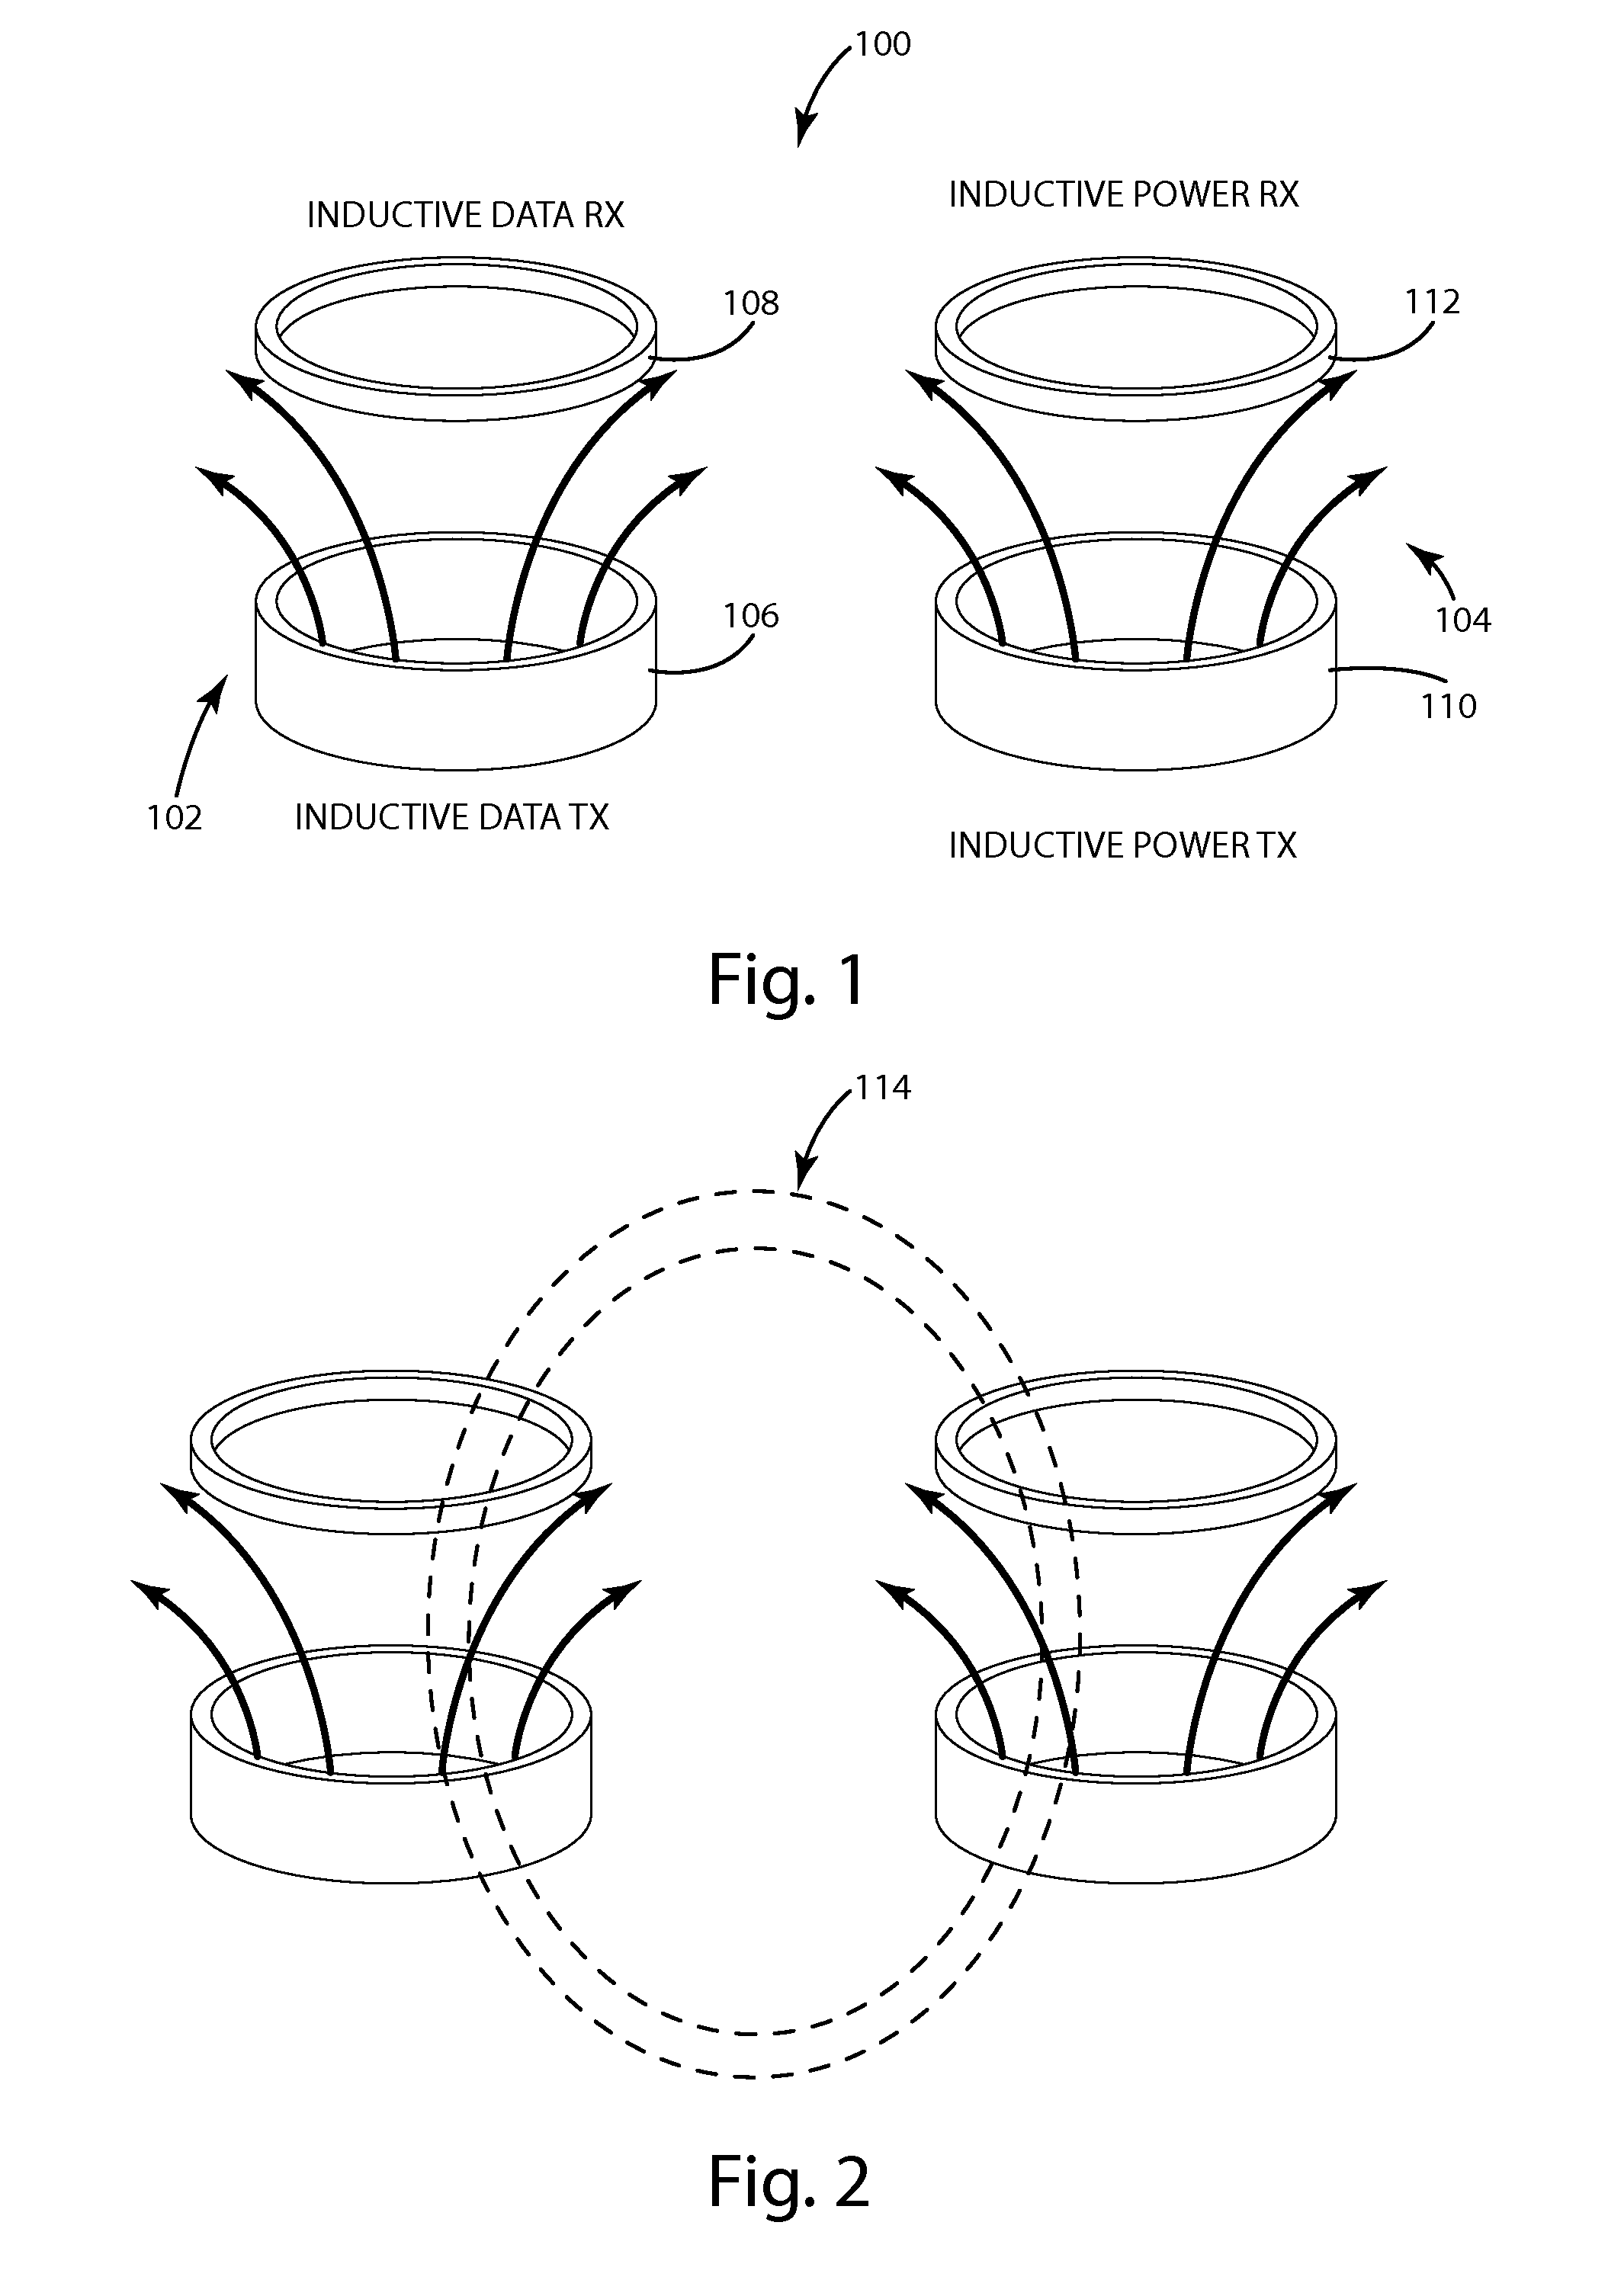 Interference mitigation for multiple inductive systems